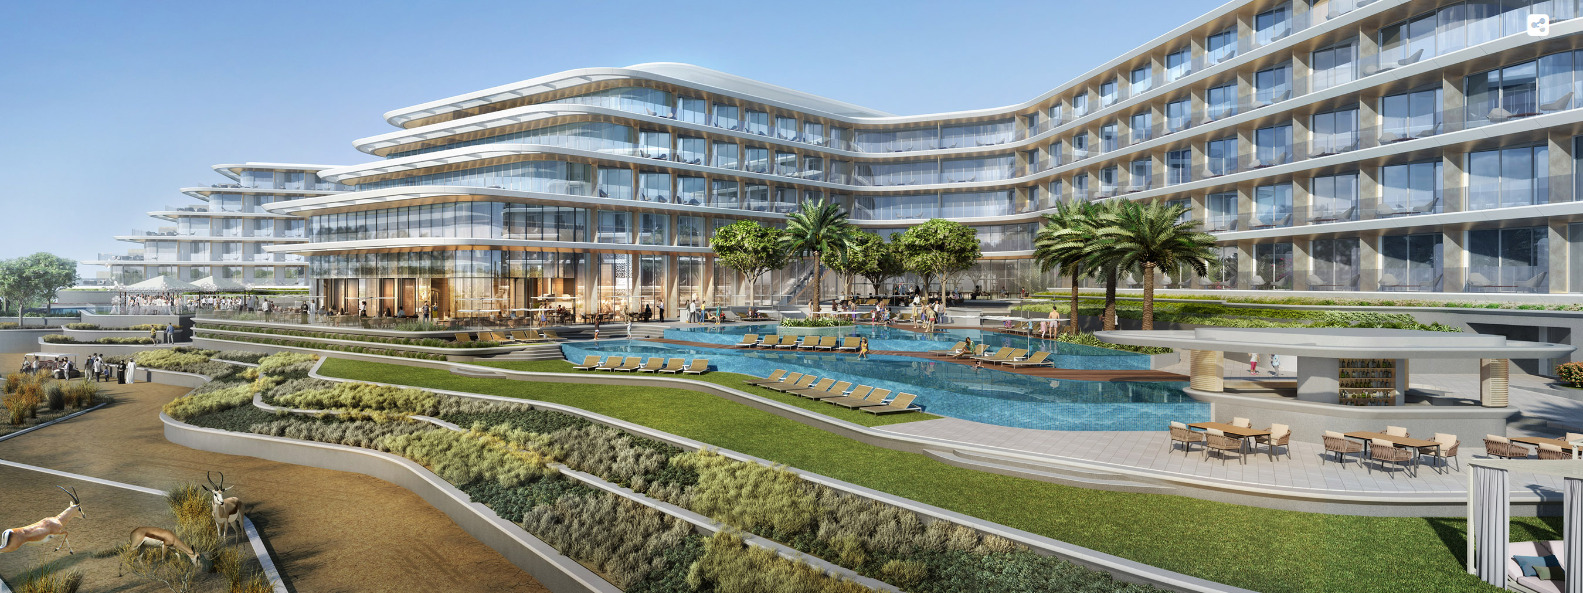 New JA Lake View Hotel Opens At ‘Dubai’s Largest Experience Resort’